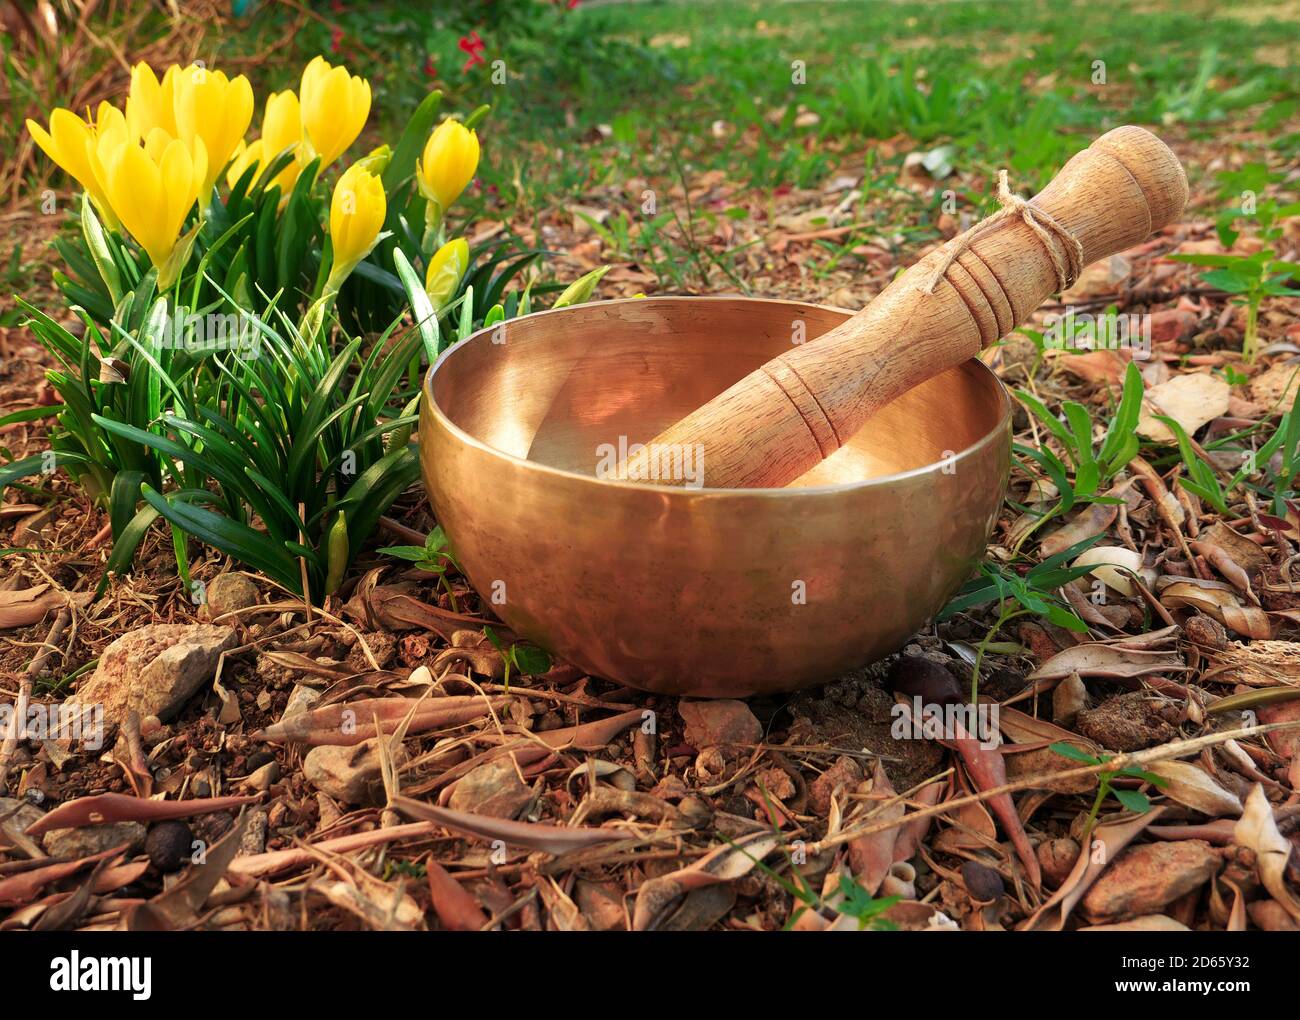 Singing bowl placed on the ground in the nature near the crocus flowers Stock Photo